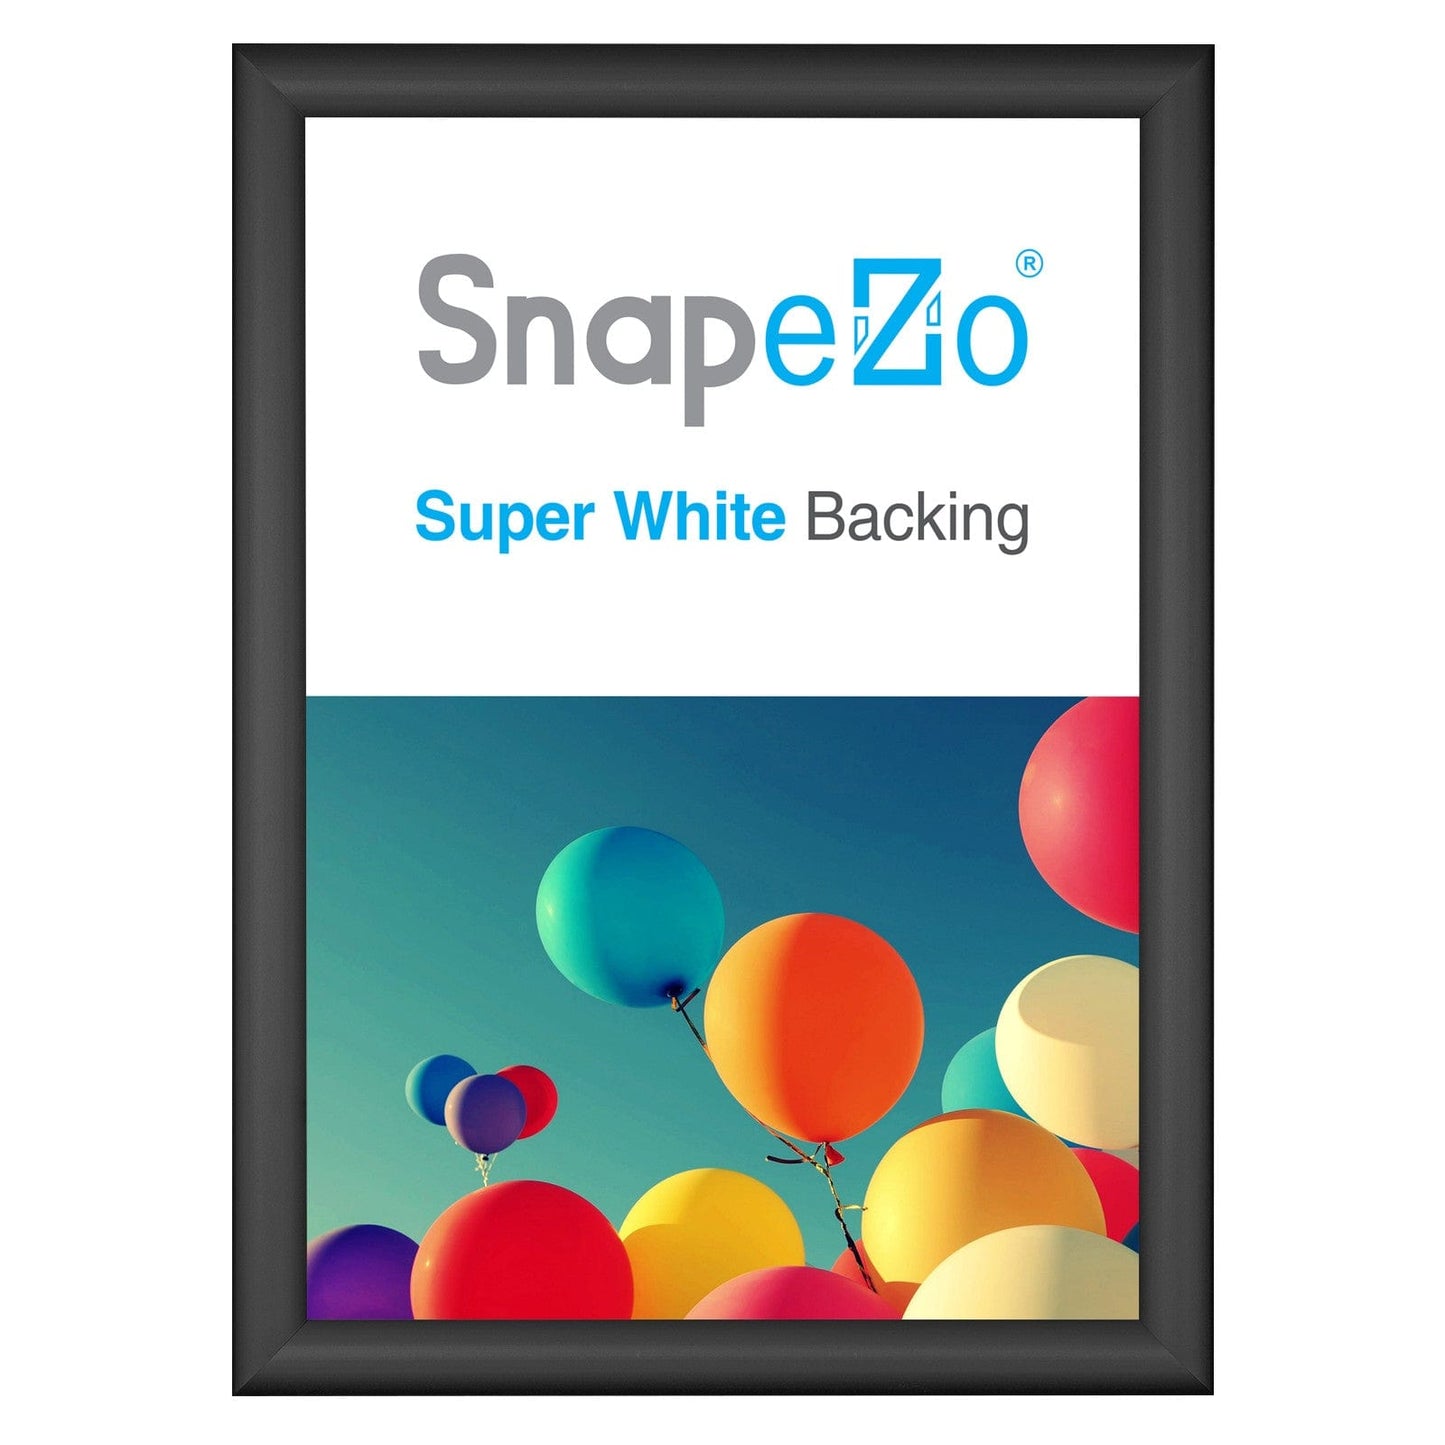 A3 (11.7 x 16.5 in) Black SnapeZo® Poster Snap Frame 1" - Snap Frames Direct